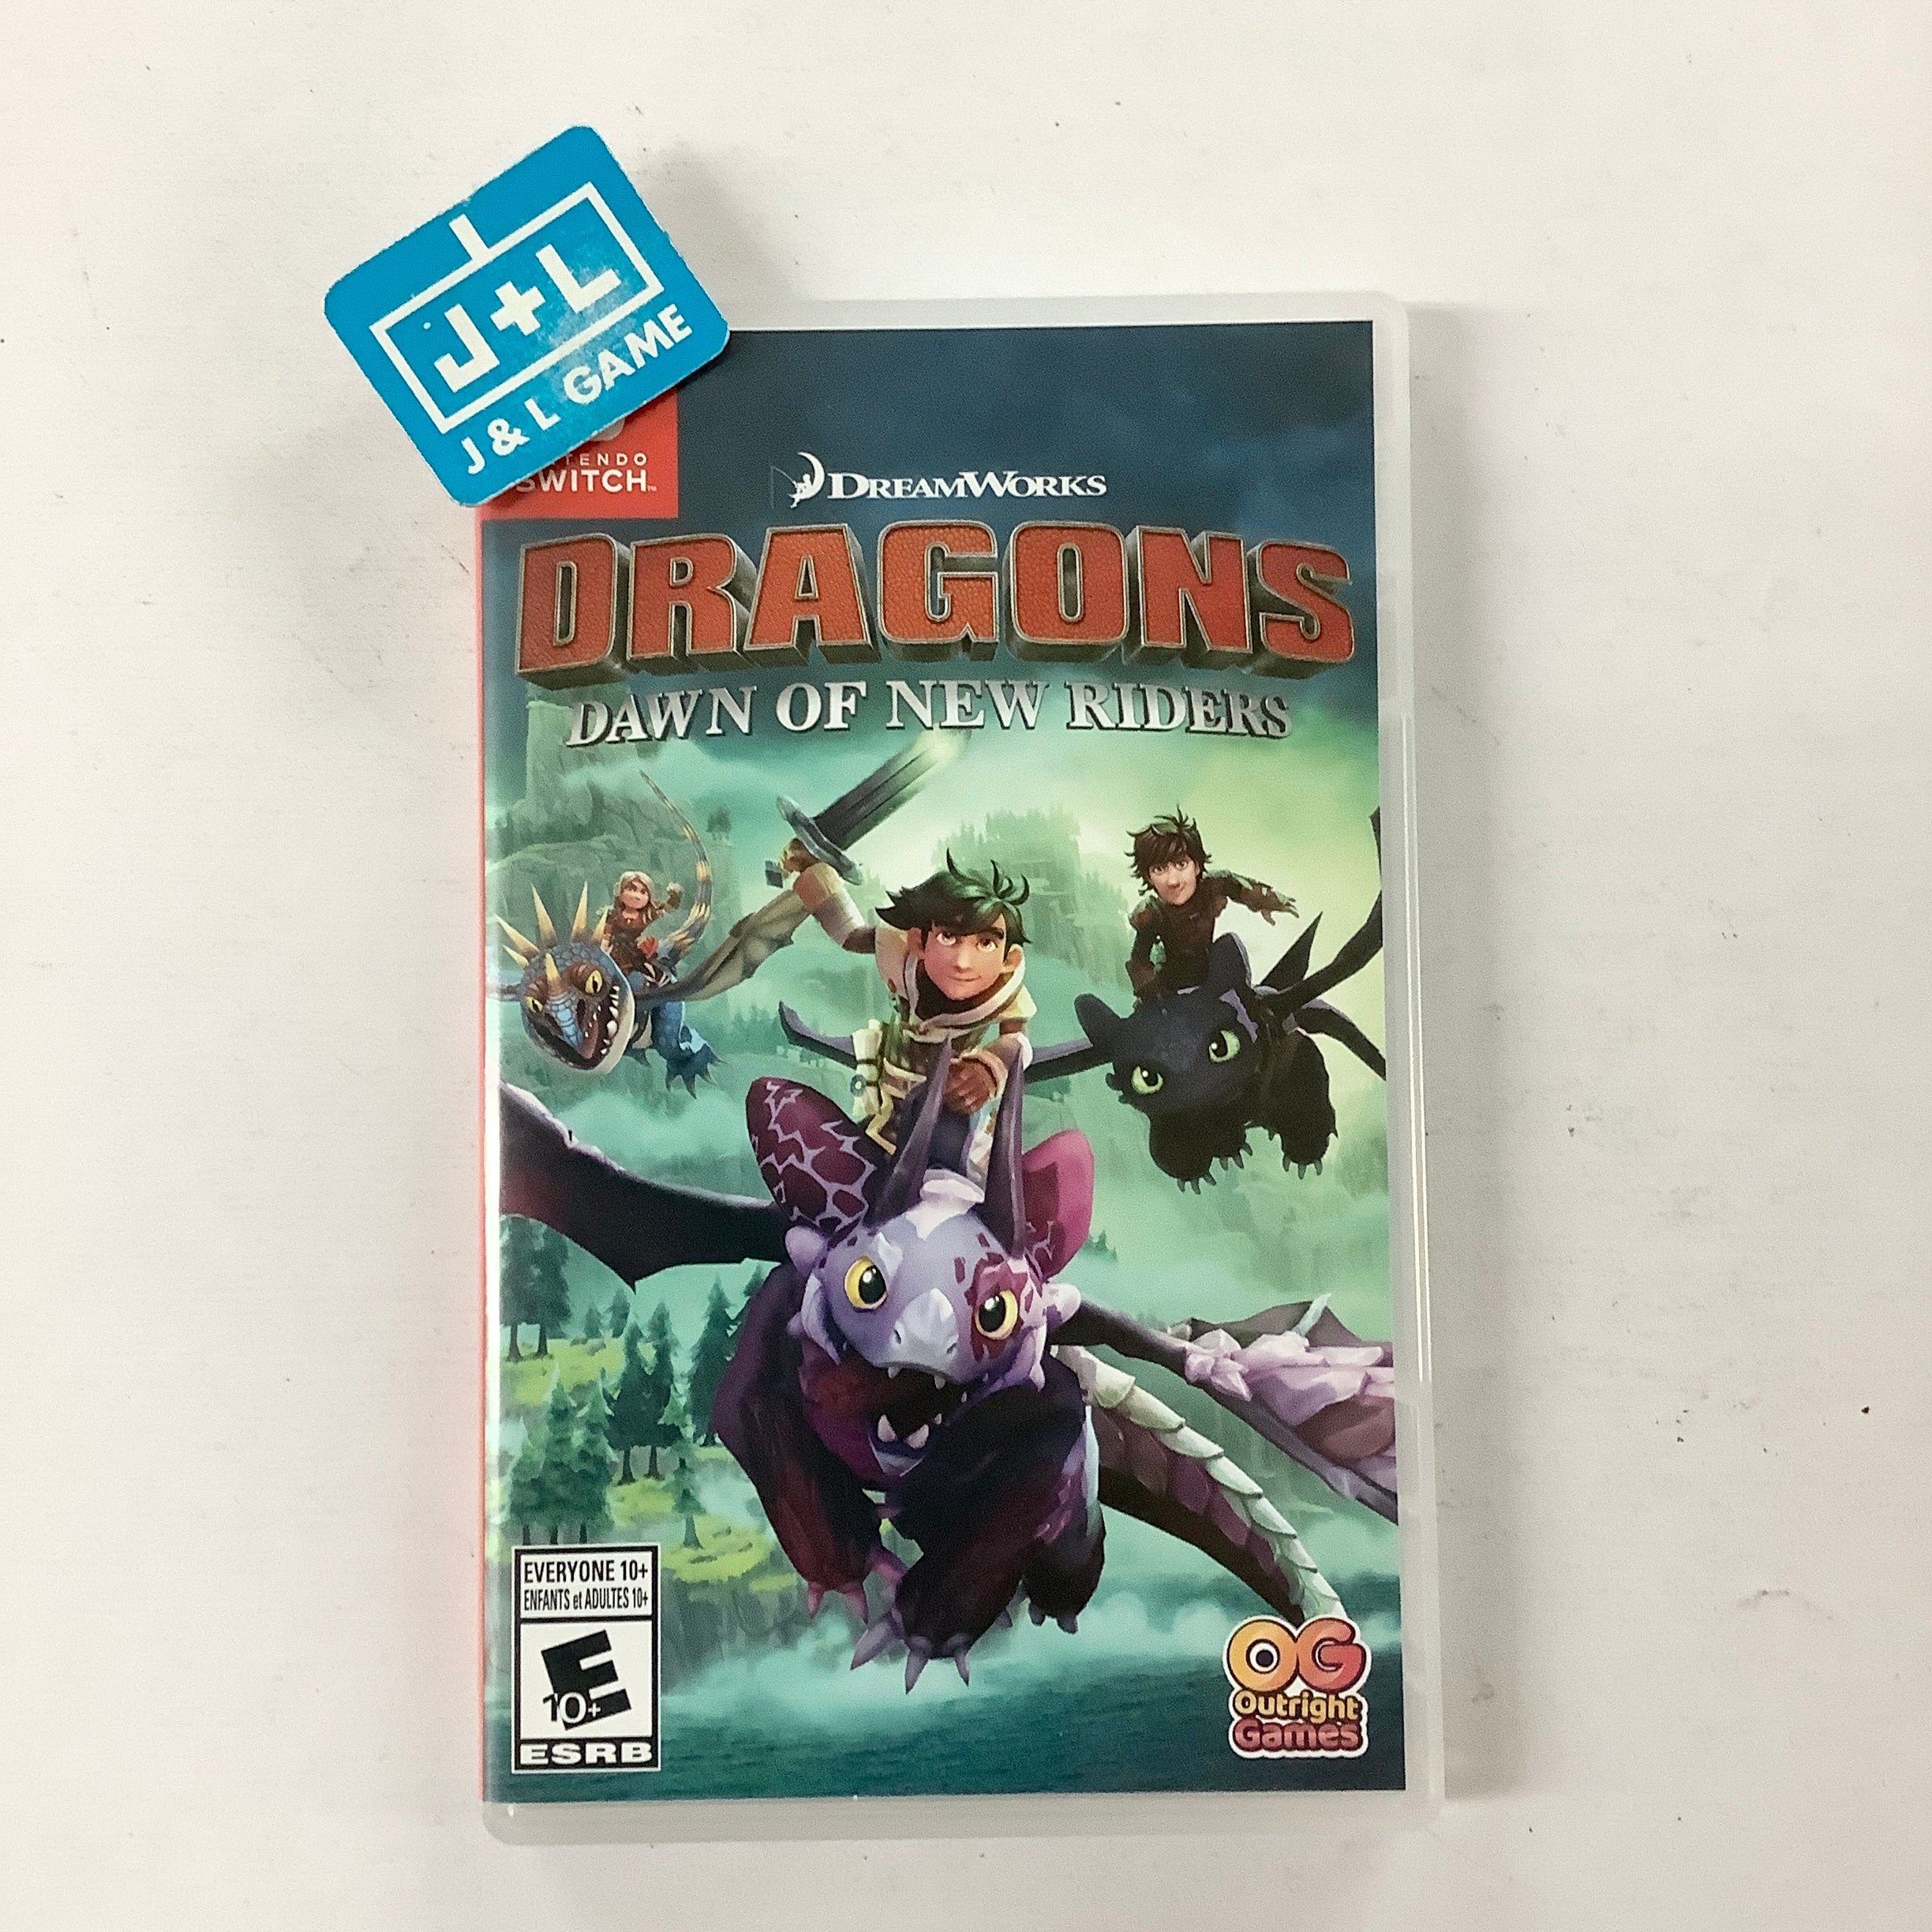 DreamWorks Dragons Dawn of New Riders - (NSW) Nintendo Switch [Pre-Owned] Video Games Outright Games   